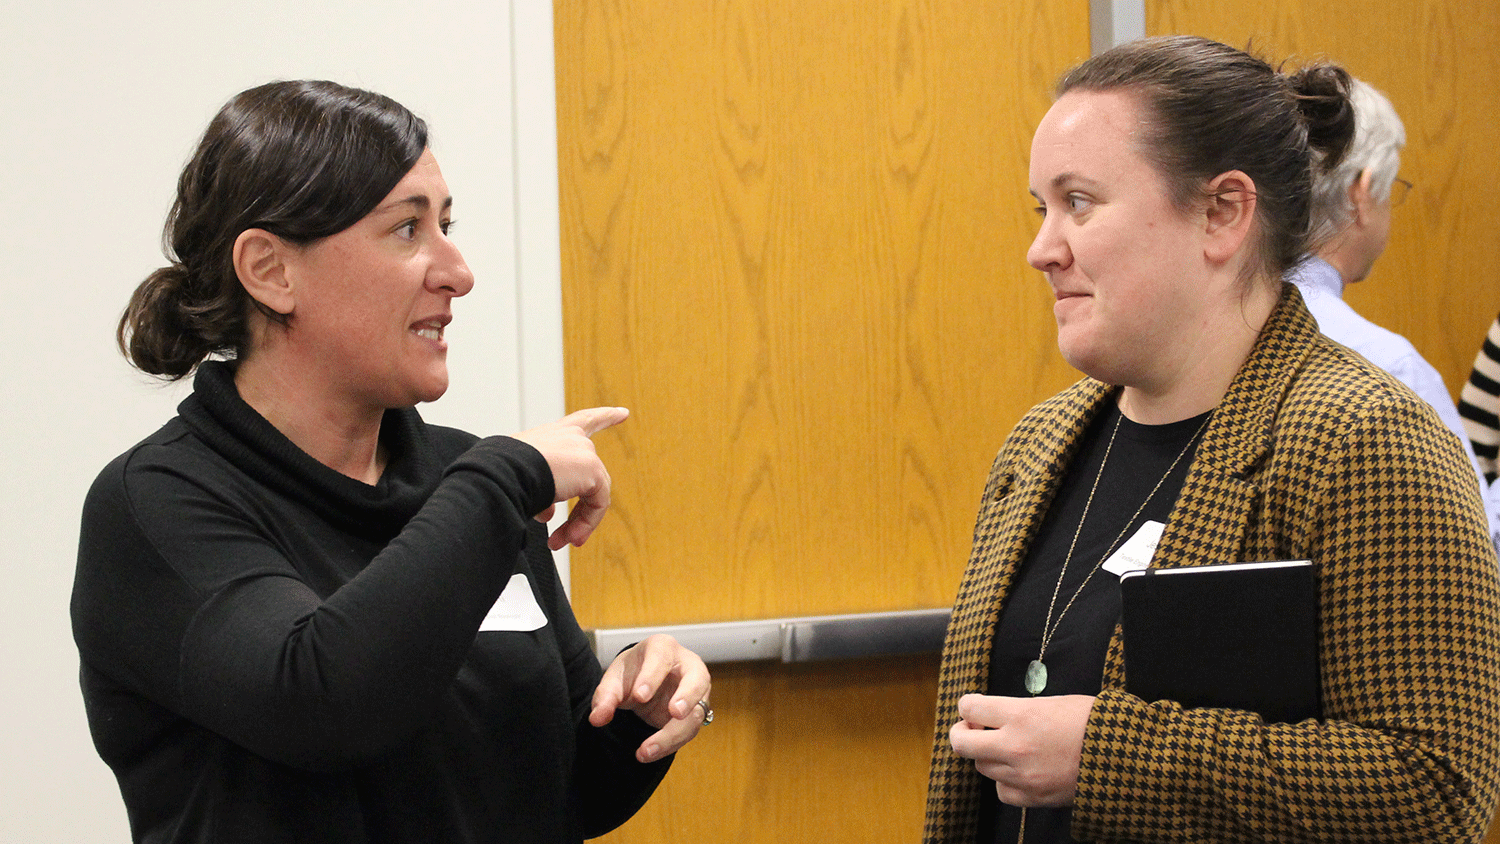 Ross Sozzani talks with Jessica Gluck during the Nov. 13 ideation session